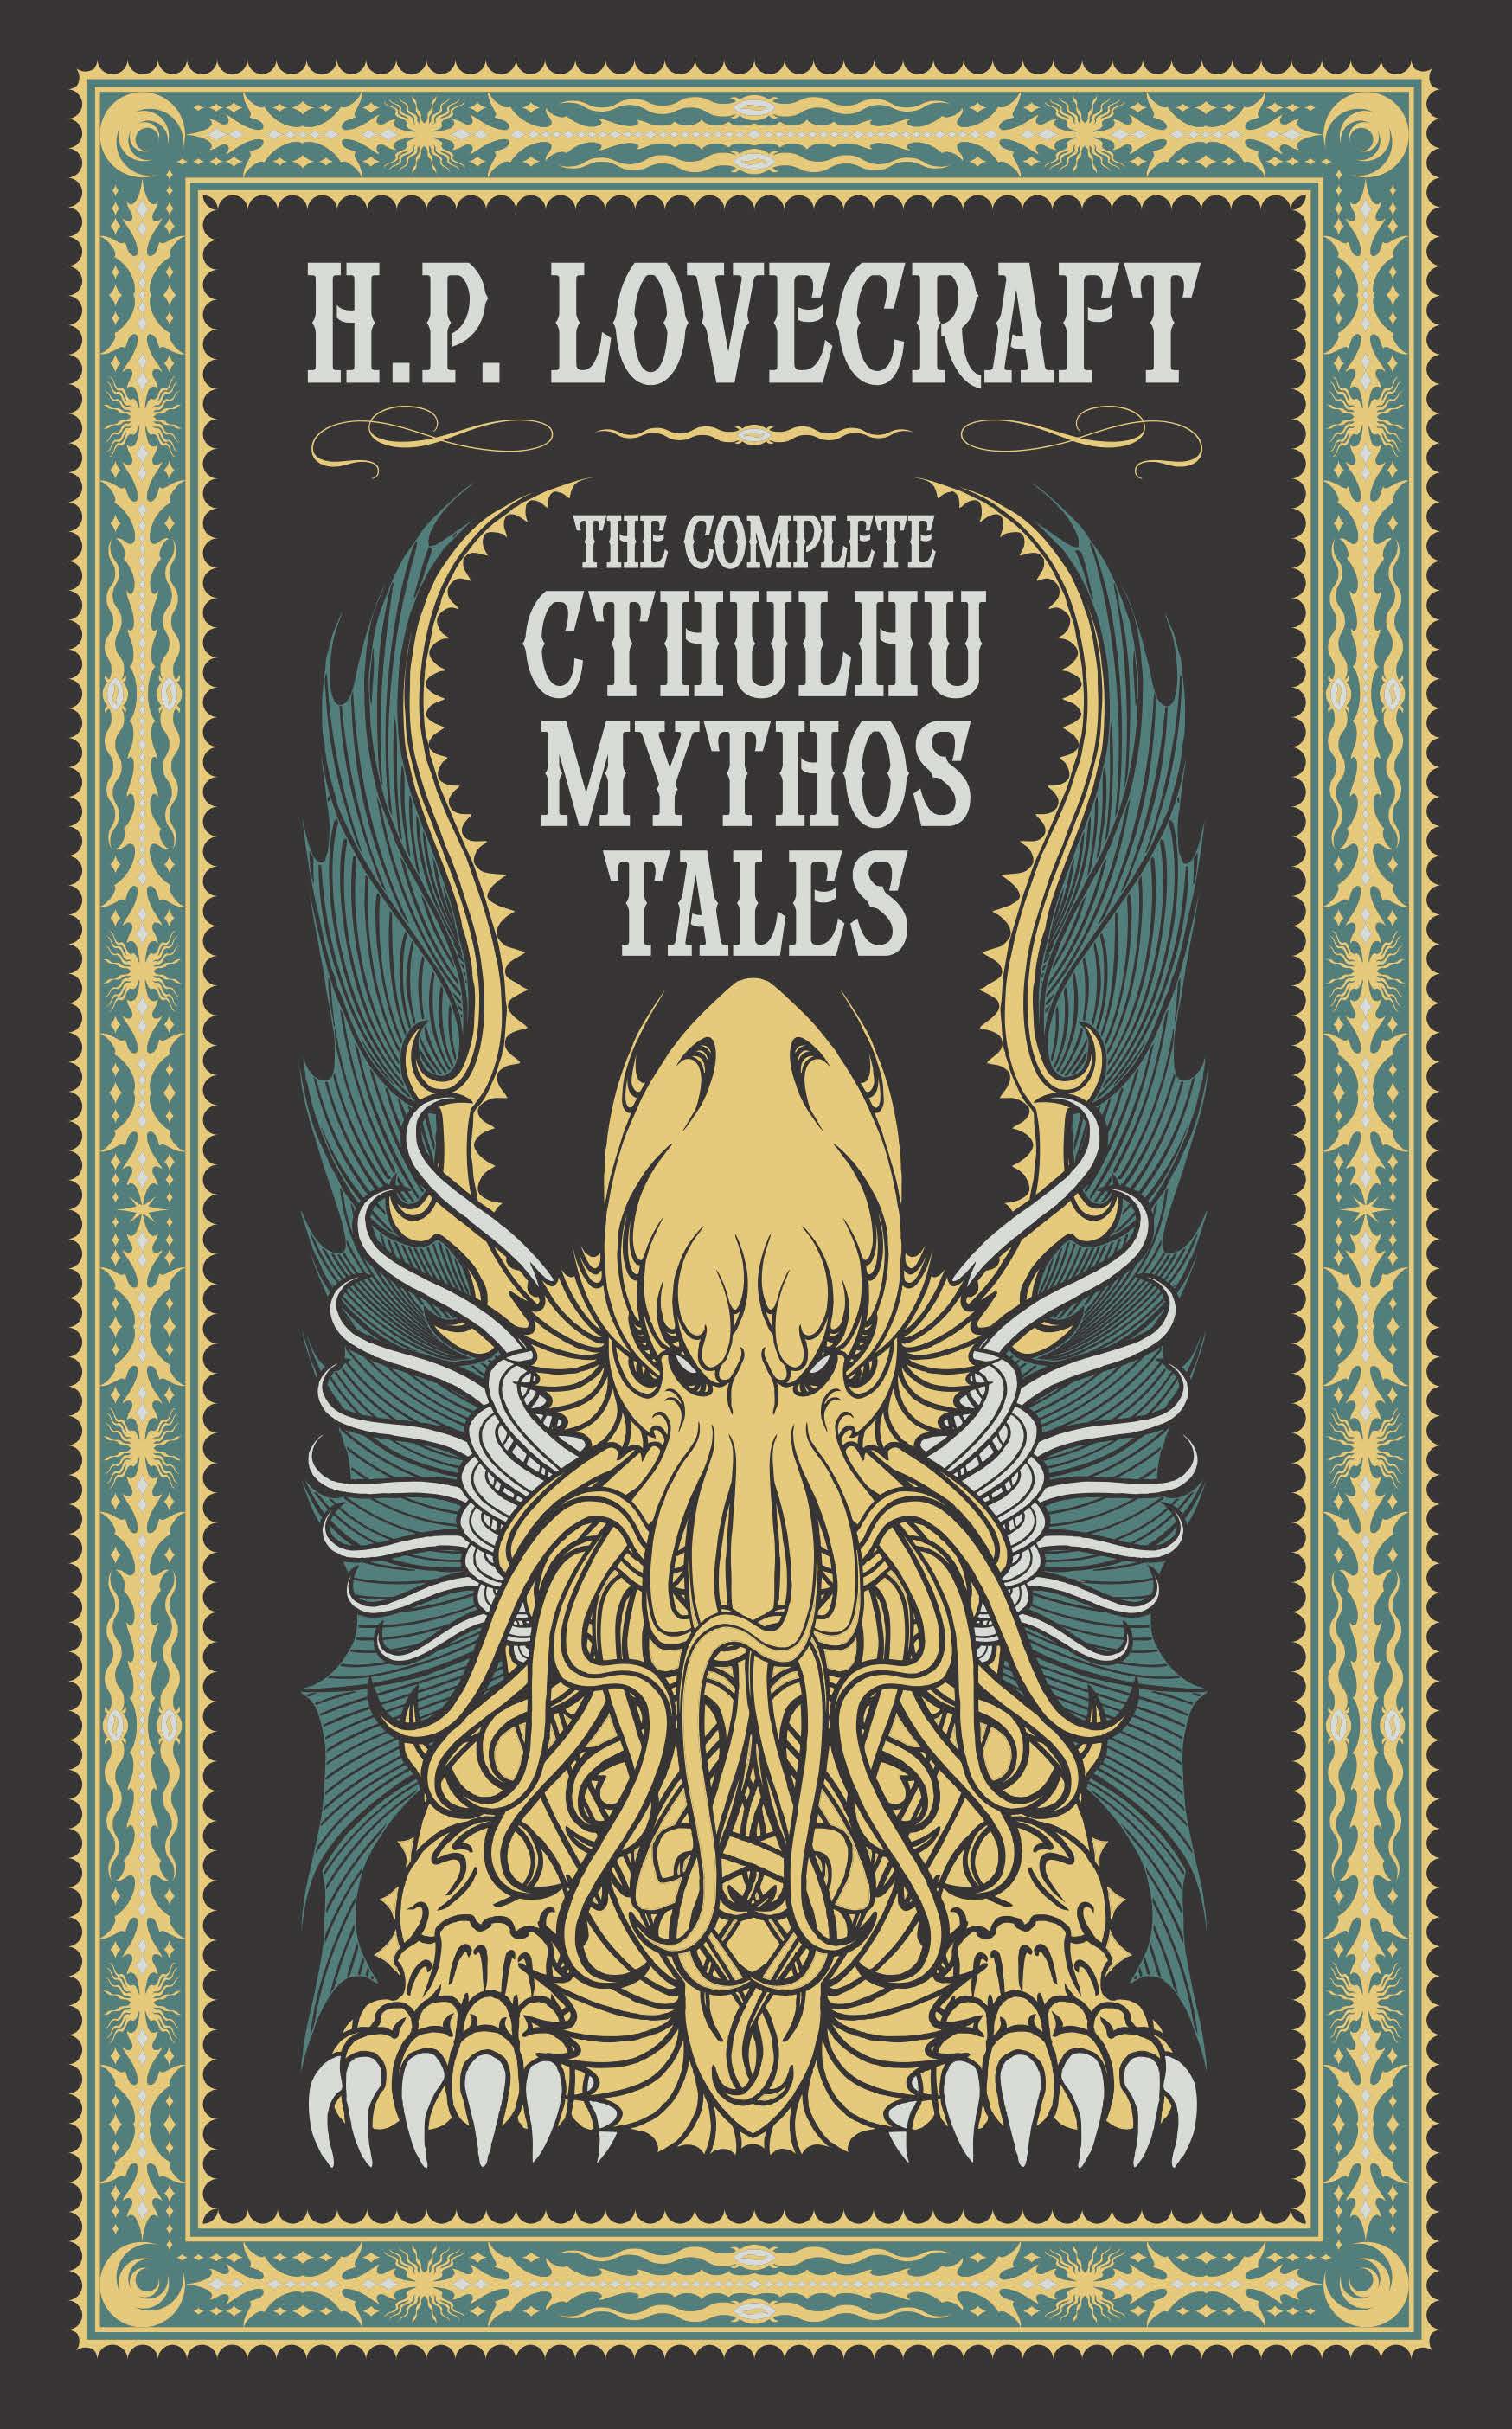 the tale of cthulhu